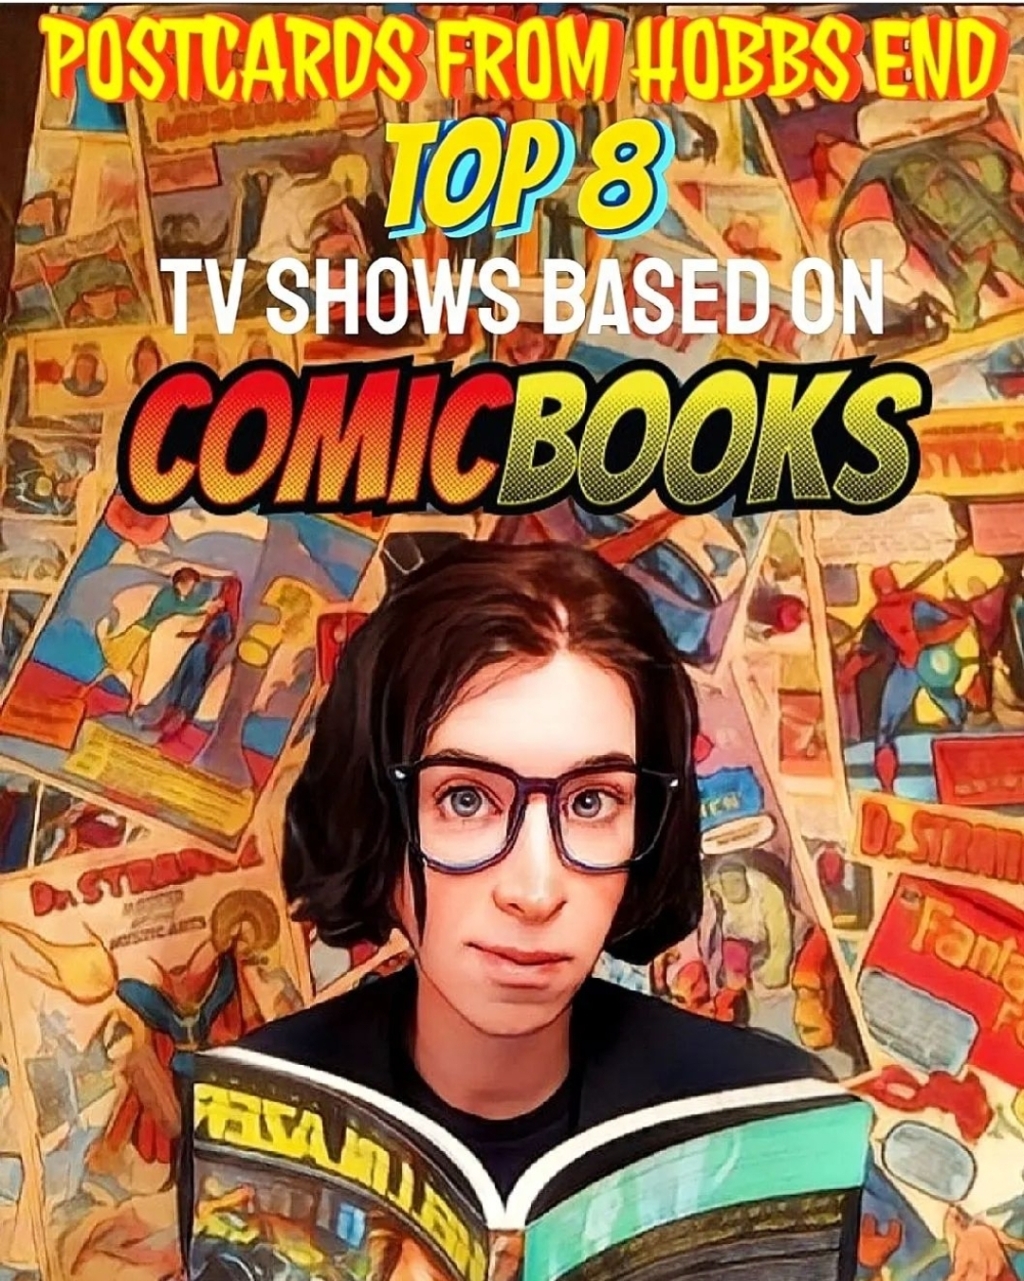 My Top 8 TV Shows Based On Comicbooks (Originally Published September 2022)